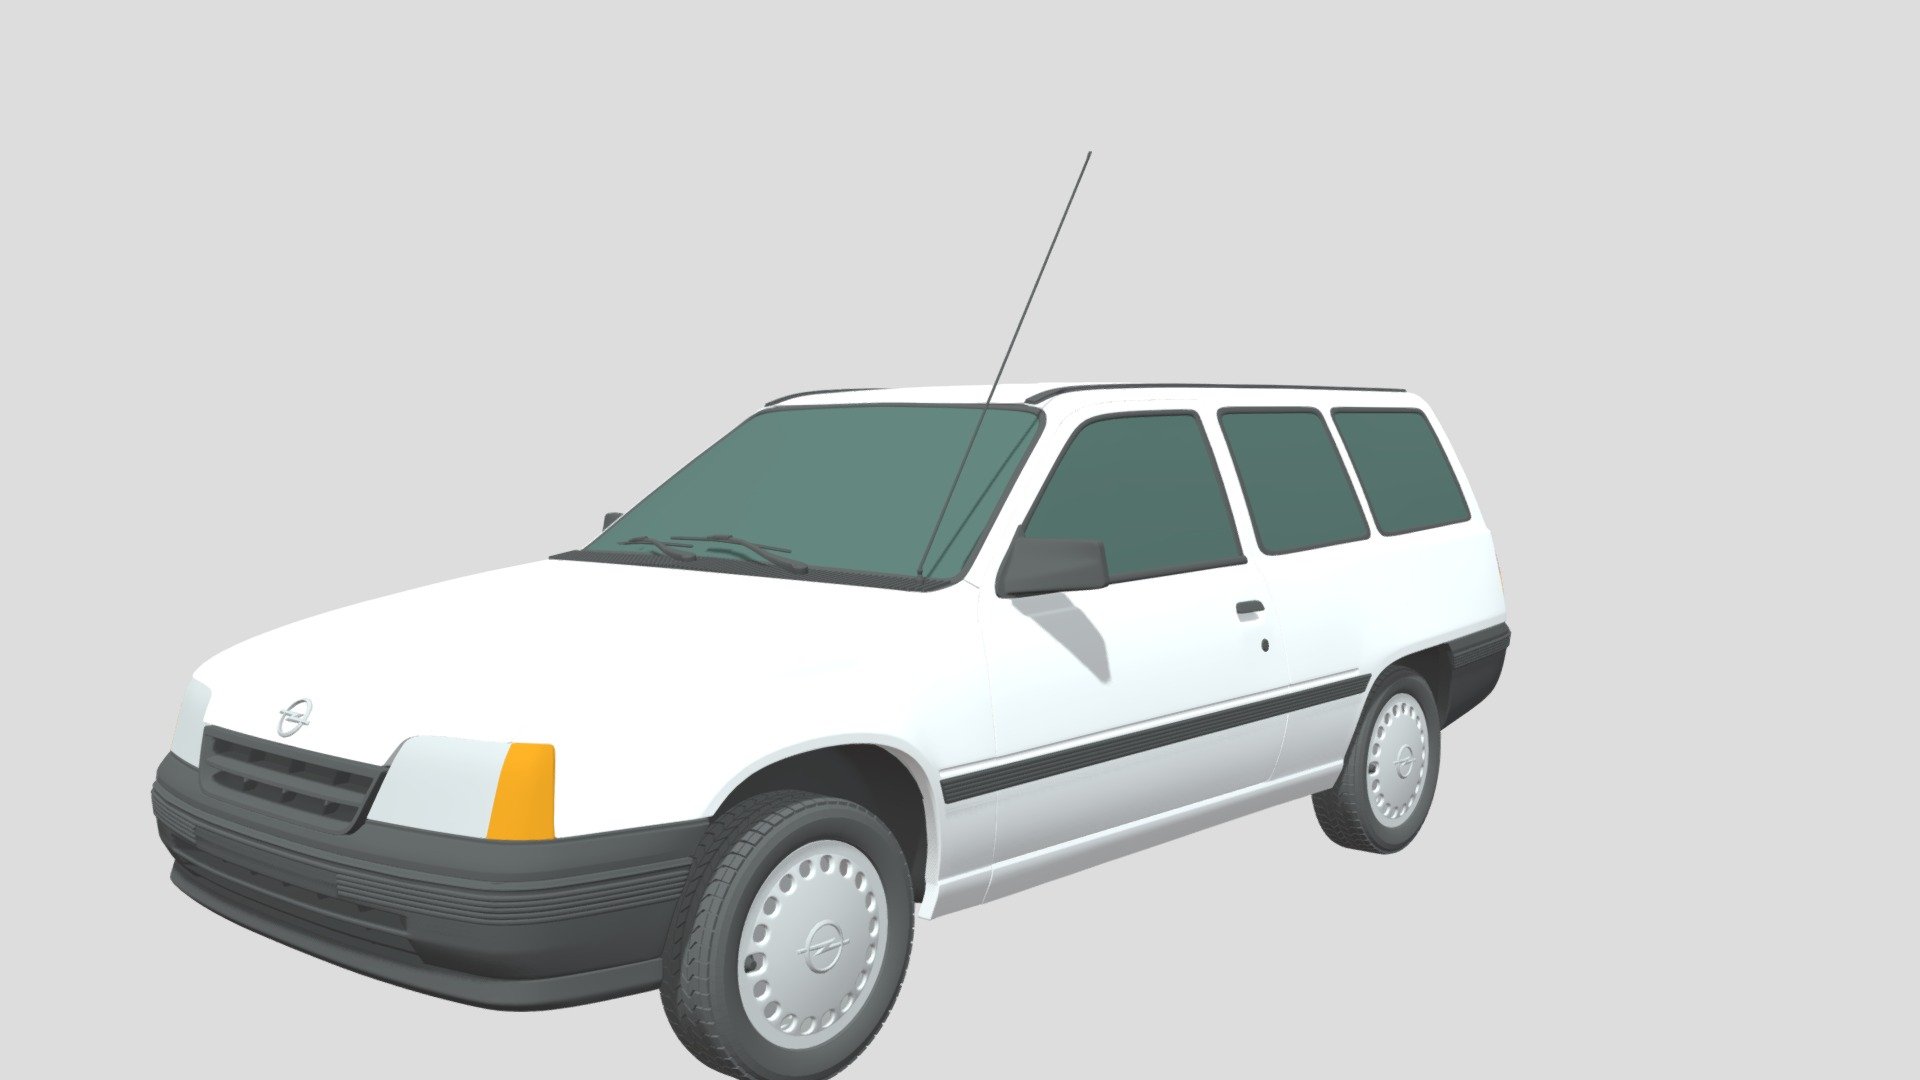 Introducing our stunning photorealistic 3D model of the Opel Kadett E Caravan (3-Doors) (1991) car, a true masterpiece of digital craftsmanship that will elevate your projects to the next level. This meticulously crafted model captures every curve, detail, and essence of a real Opel Kadett E Caravan (3-Doors) (1991) car, providing you with unparalleled realism and versatility for your creative endeavors.

Our photorealistic 3D model of the Opel Kadett E Caravan (3-Doors) (1991) car is a testament to precision and attention to detail. Each contour, from the sleek body lines to the intricacies of the headlights and tail lights, has been painstakingly recreated to mirror the elegance and realism of a genuine Opel Kadett E Caravan (3-Doors) (1991) automobile. Whether you're an automotive designer, a video game developer, or a filmmaker, this 3D model will bring your visions to life with exceptional fidelity 3d model